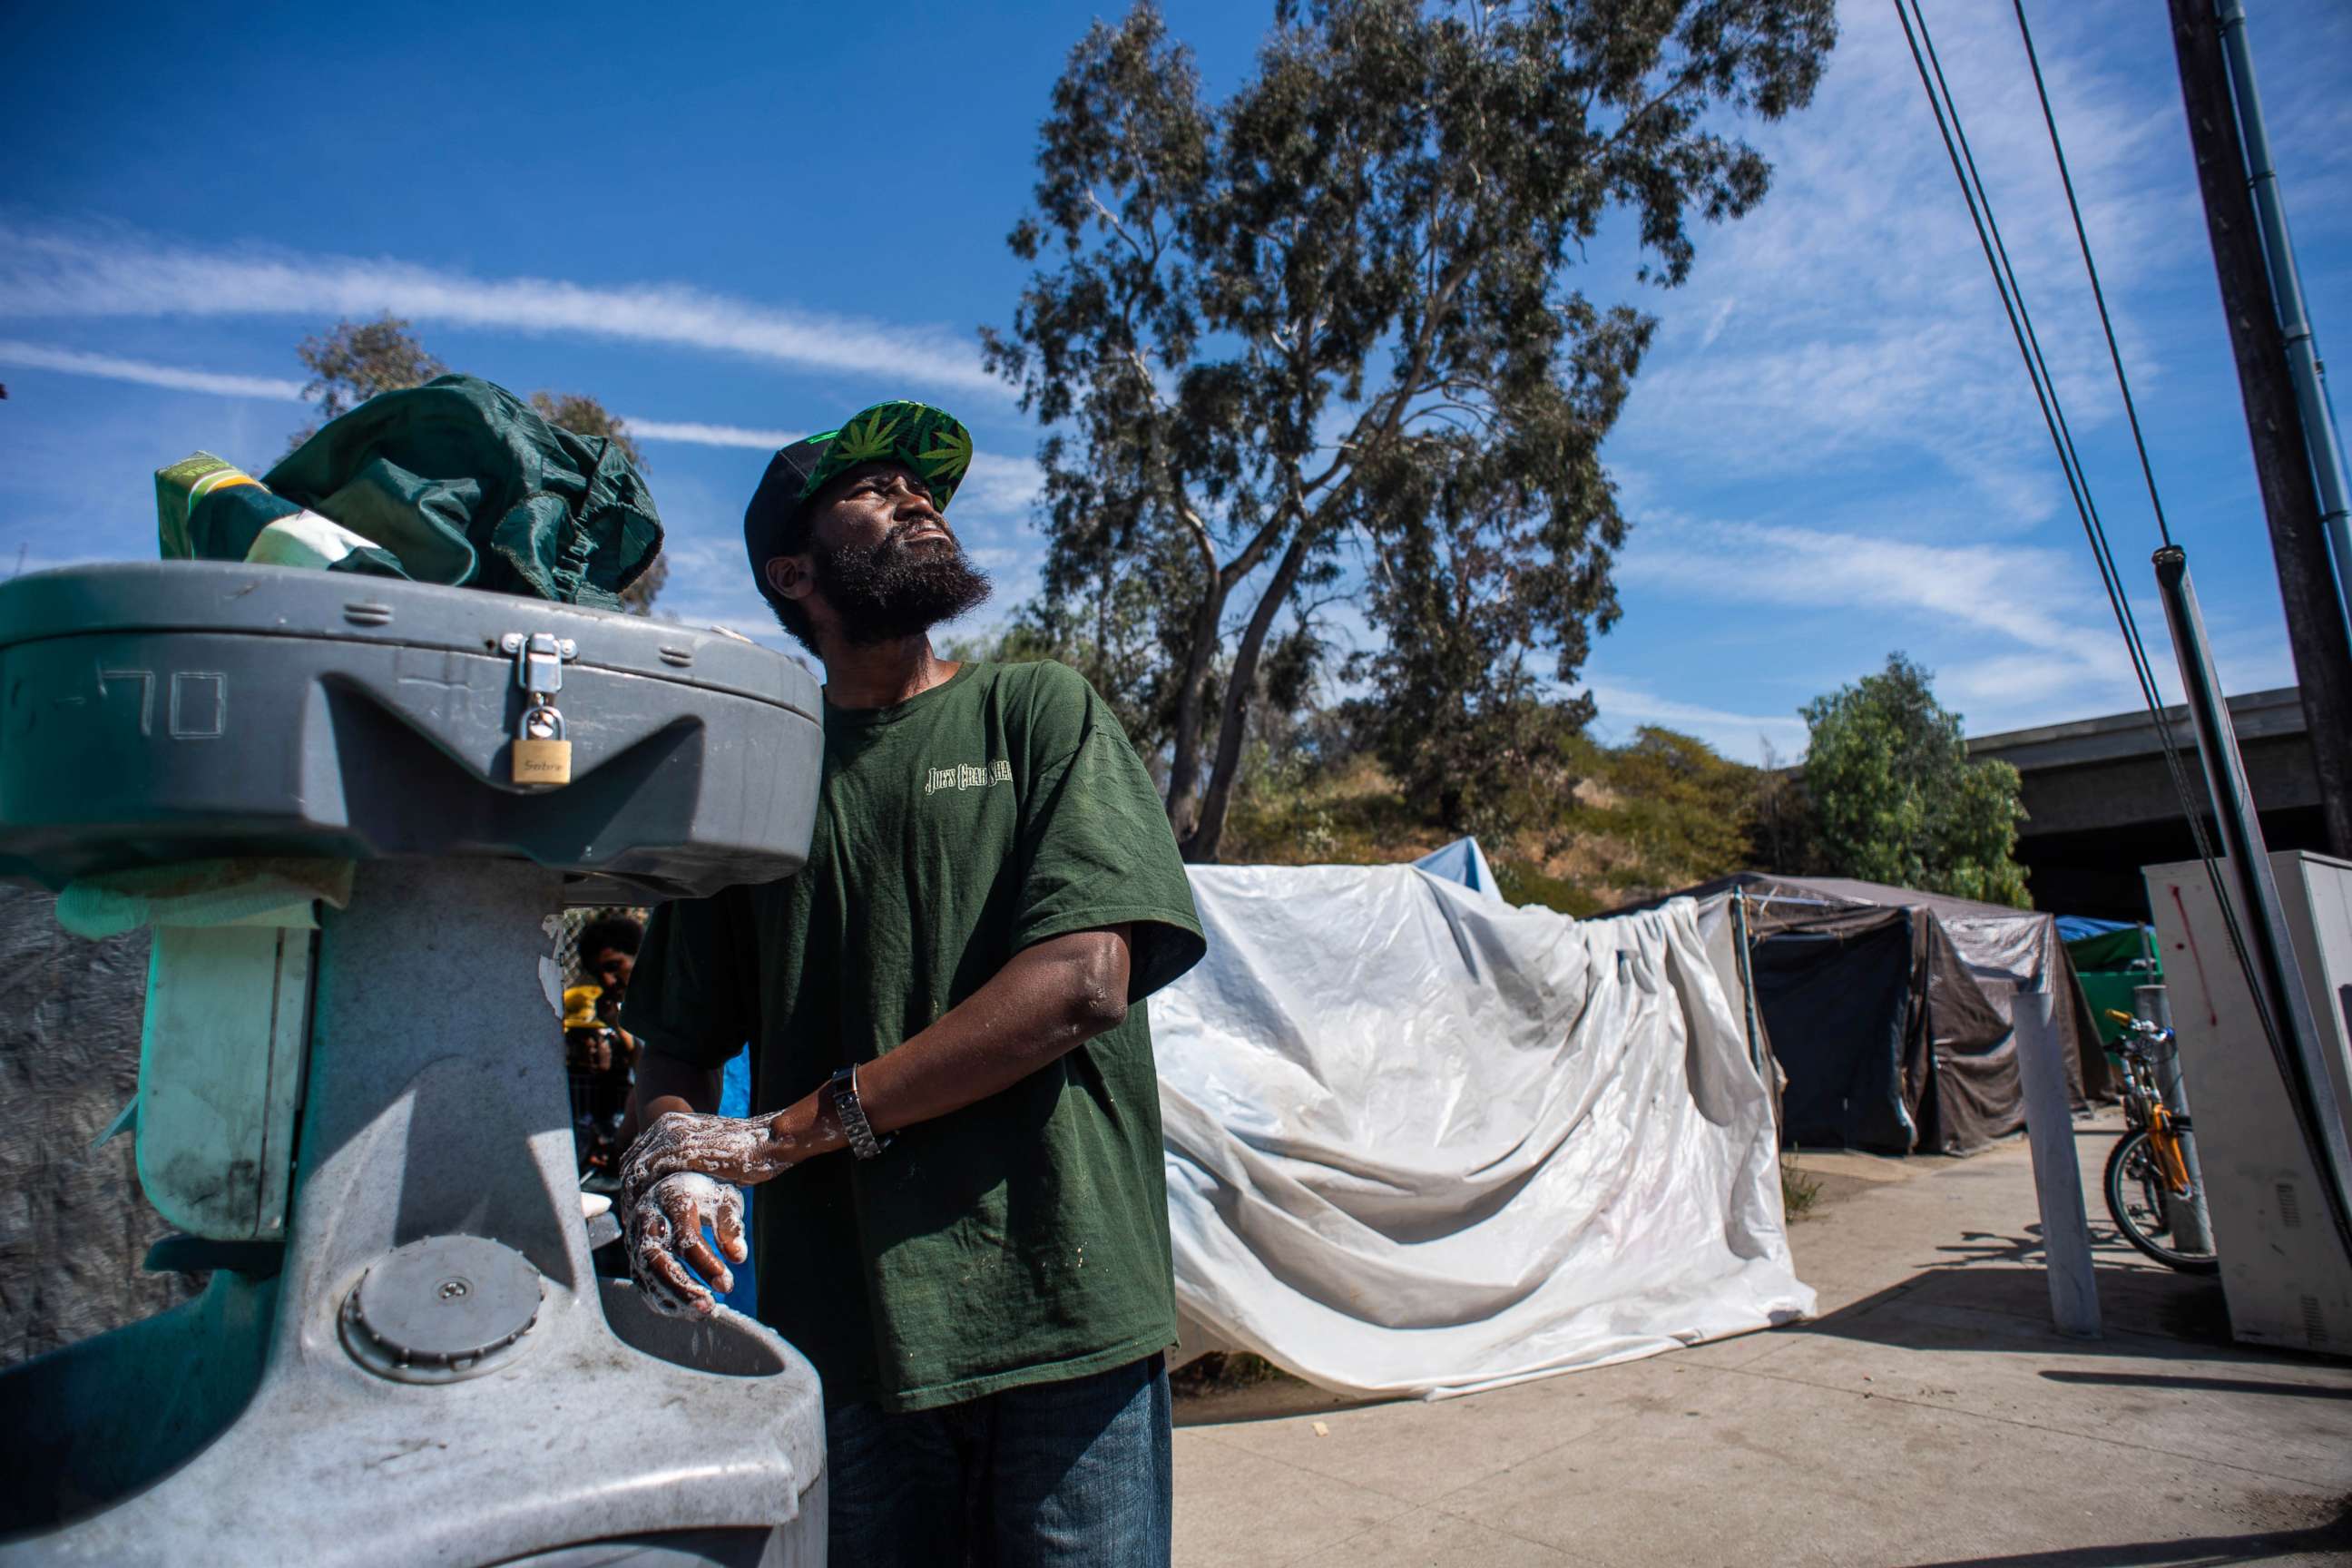 PHOTO: A resident of a homeless encampment in Pacoima, Calif., washes his hands in a portable washing station on Thursday, March 5, 2020.